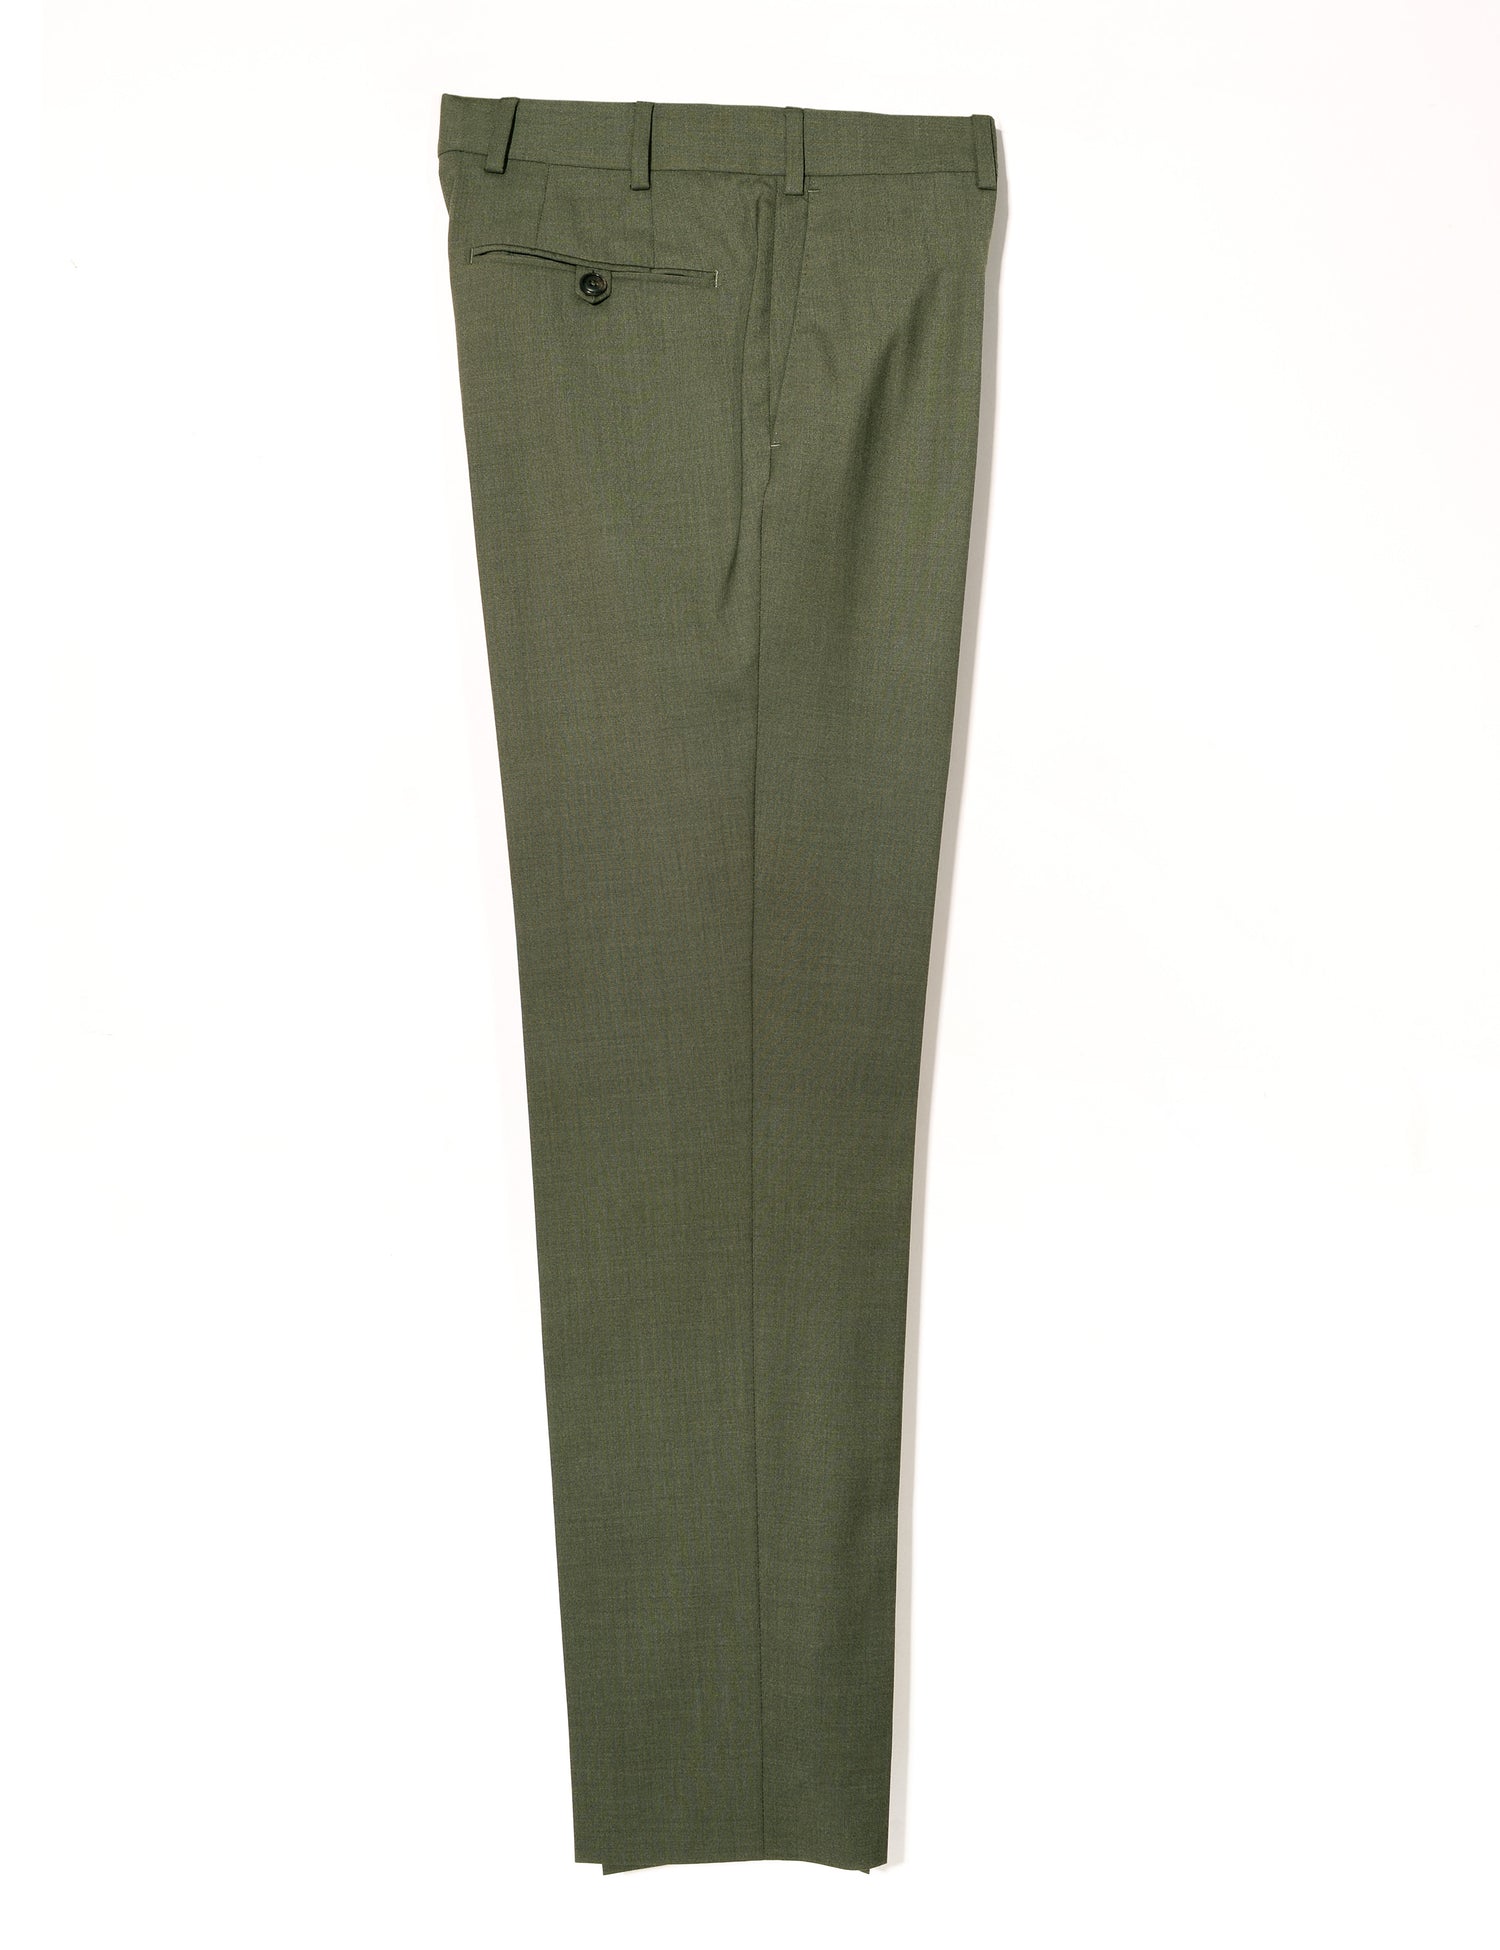 Brooklyn Tailors BKT50 Tailored Trousers in 14.5 Micron Mouliné - Agave Green full length flat shot